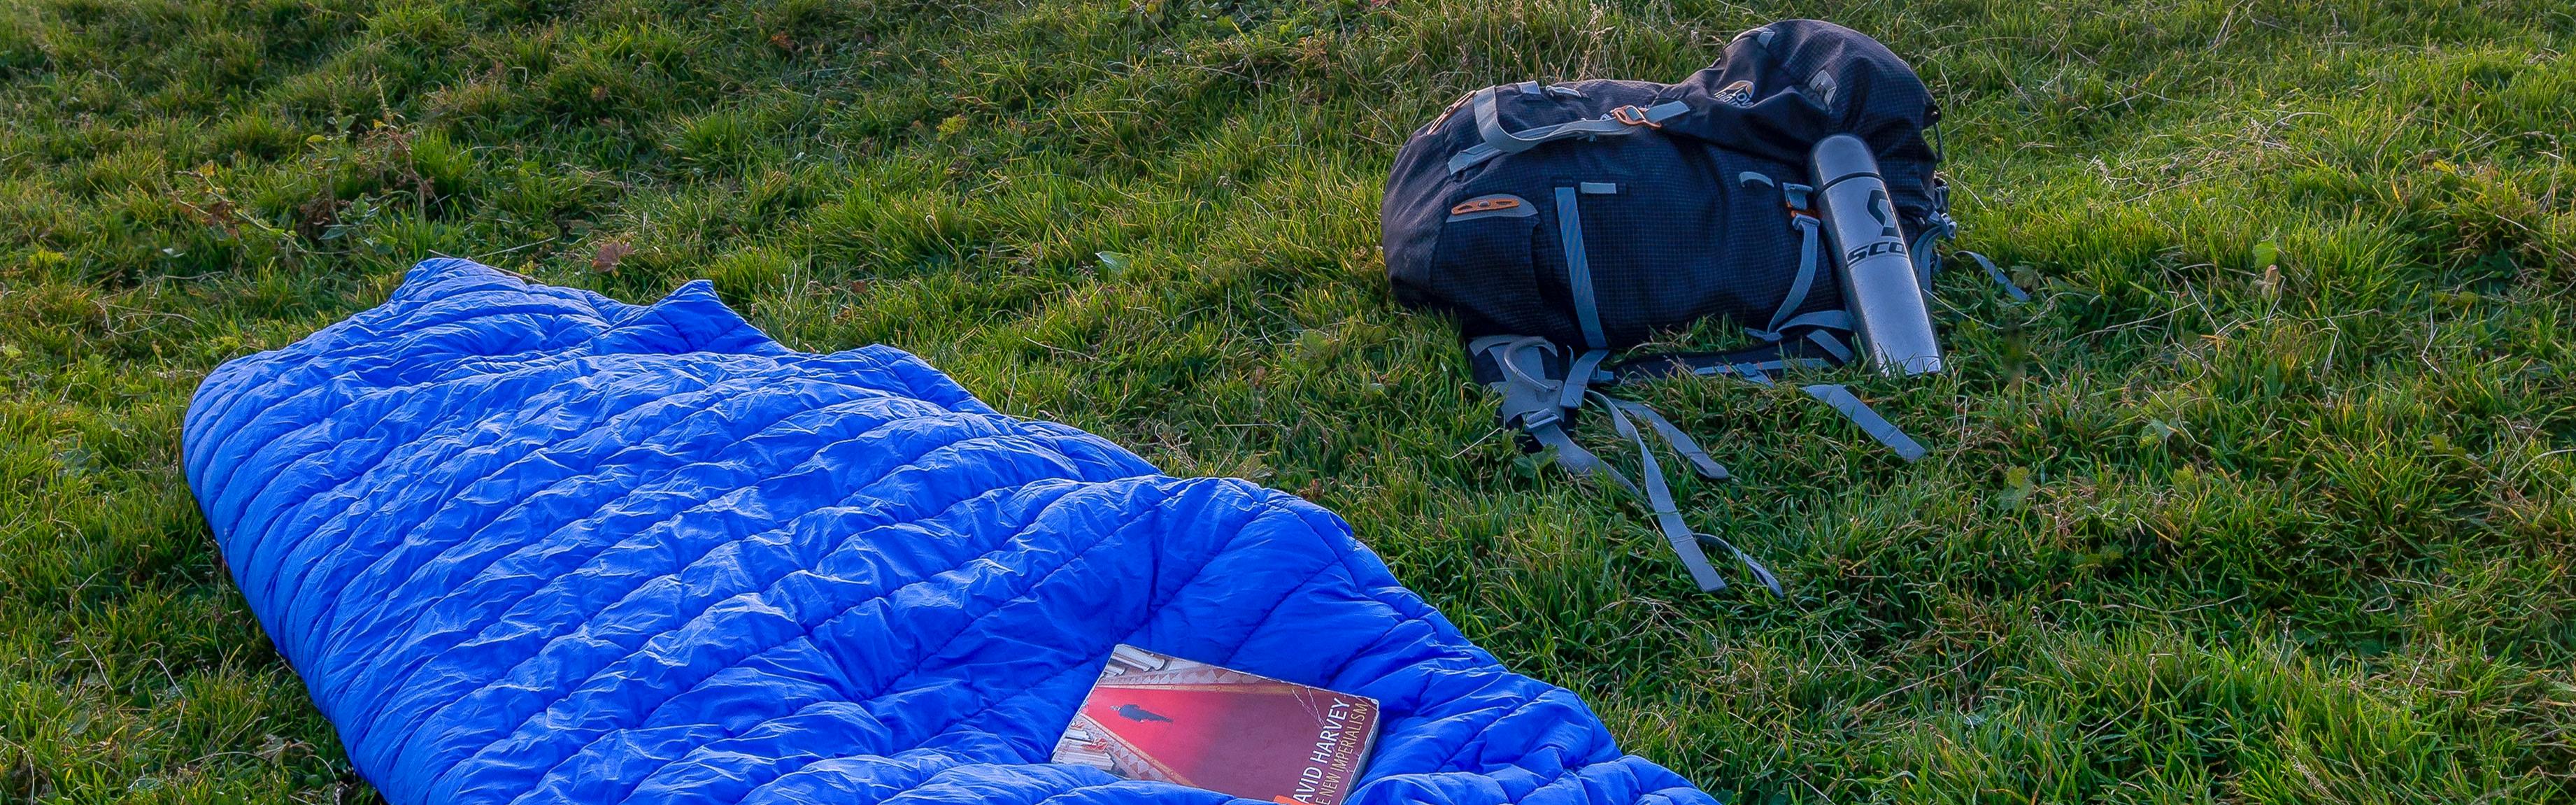 A navy backpack lays next to a royal blue sleeping bag on grassy ground. A book is sitting on top of the sleeping bag. 